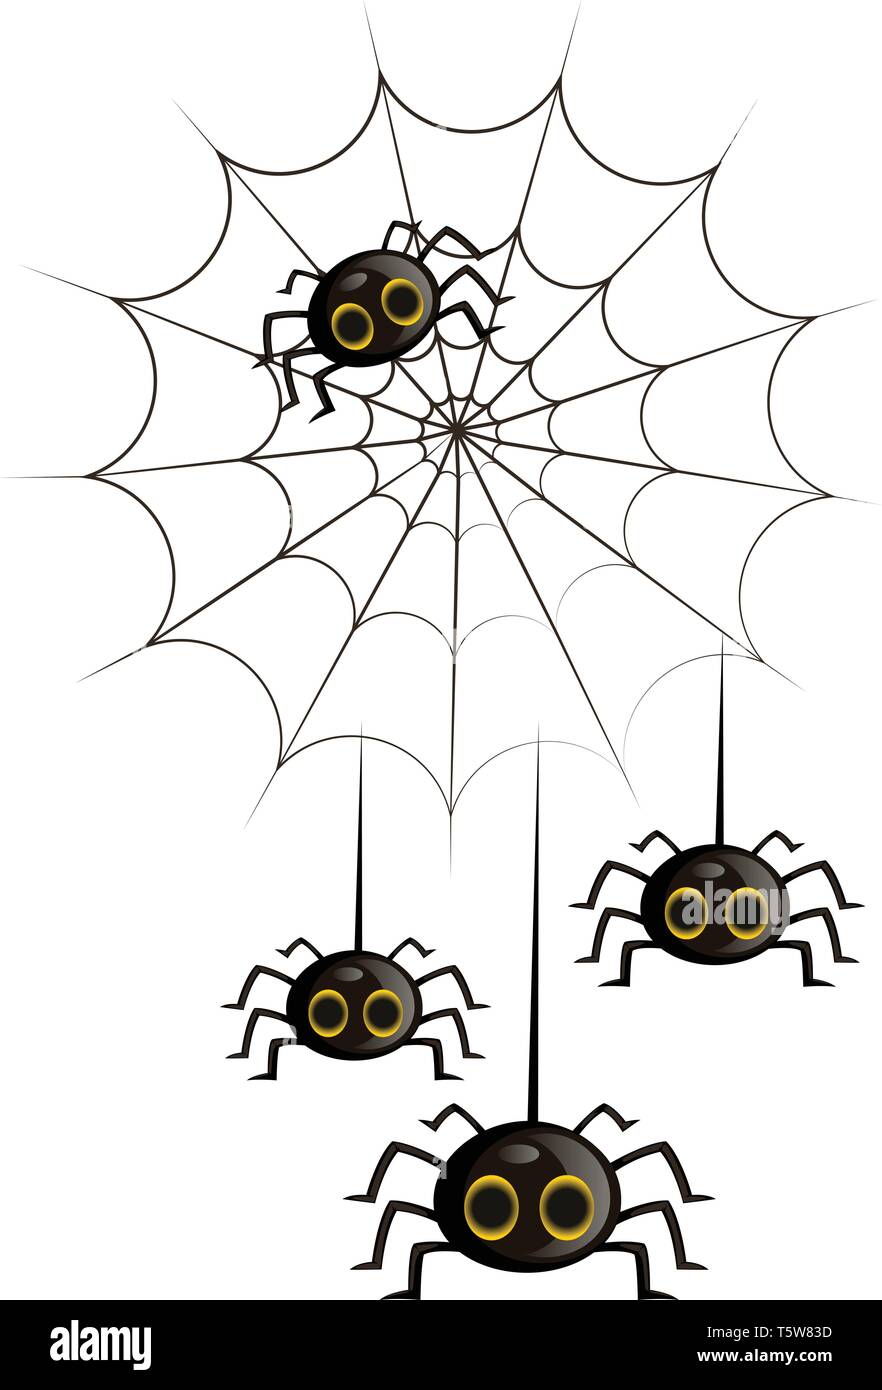 Four black cute cartoon spiders in a spiderweb vector illustration on white background. Stock Vector